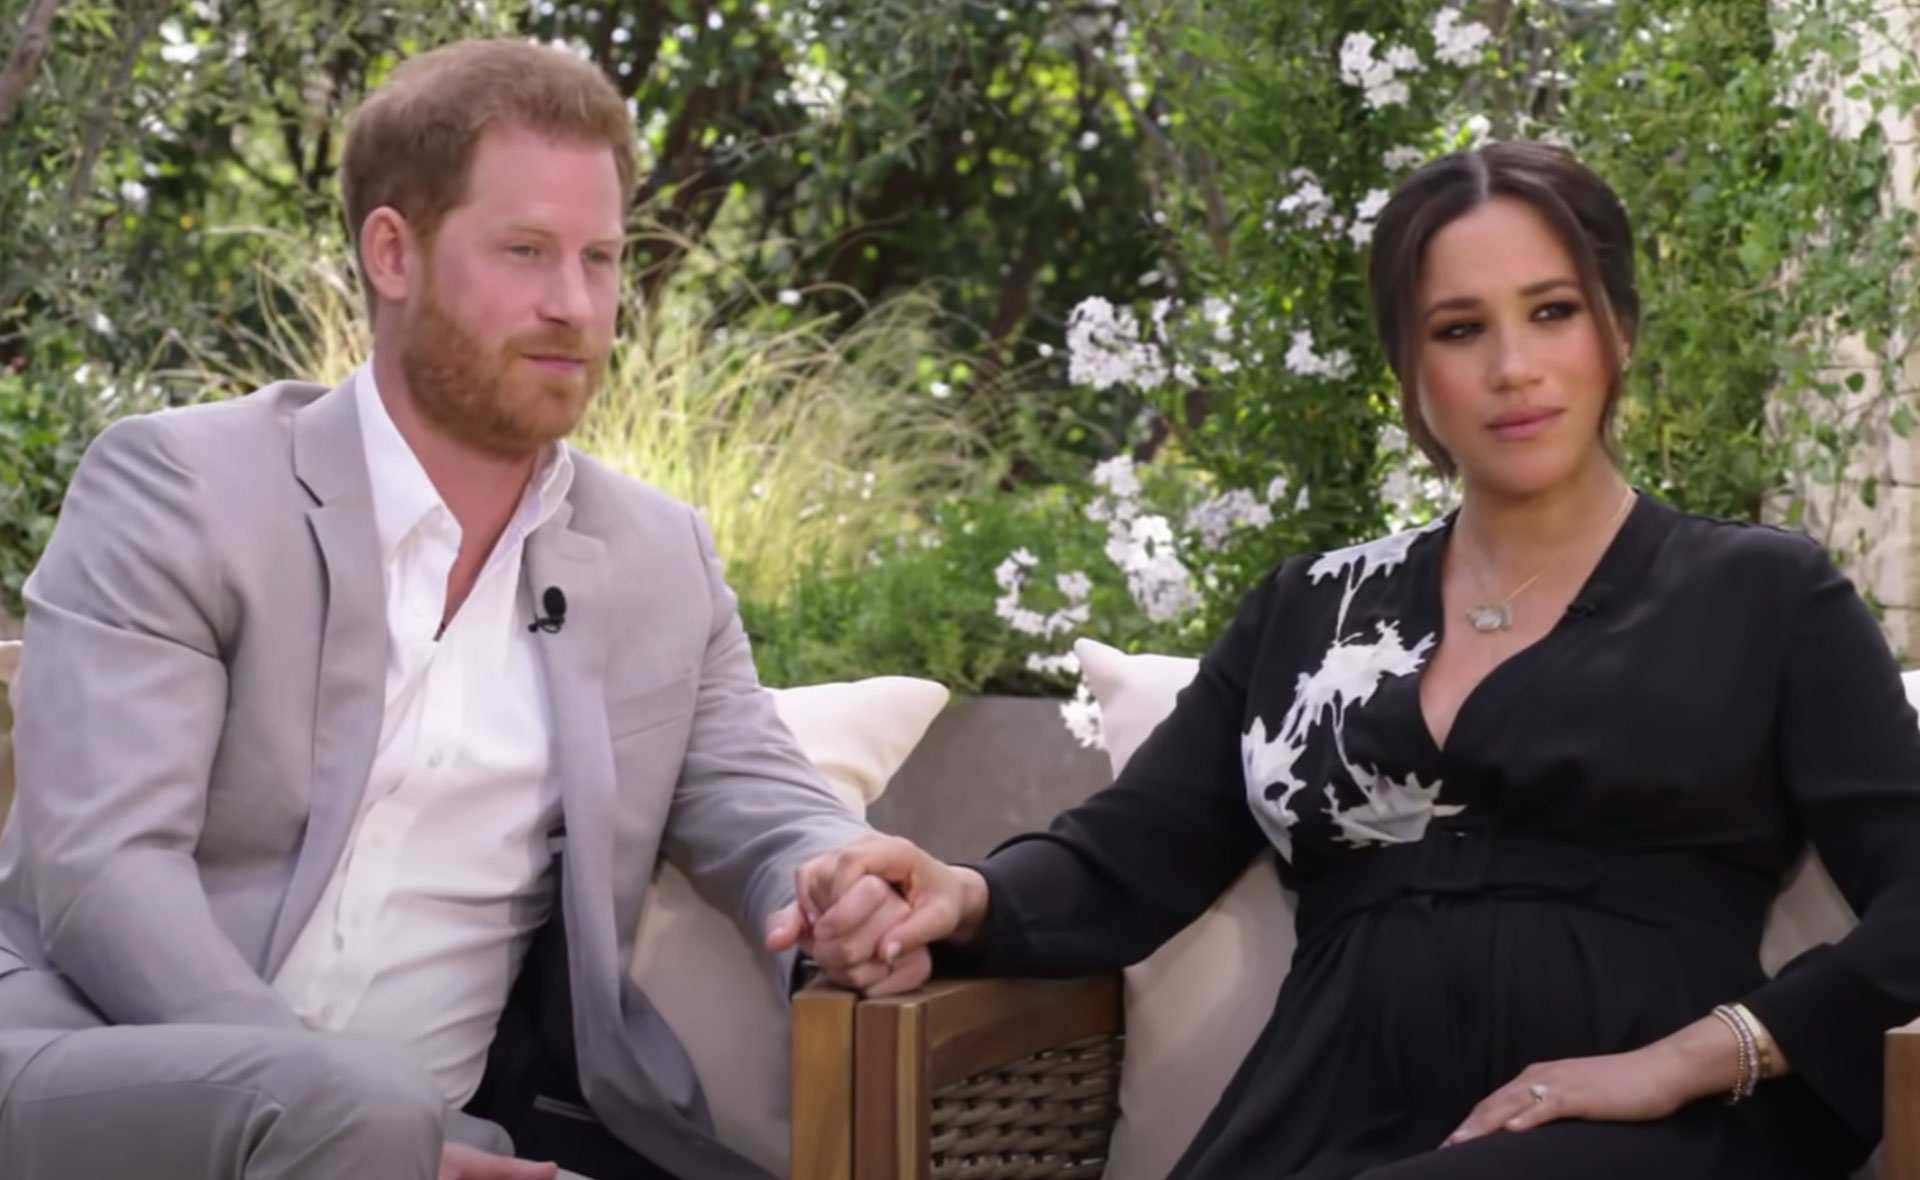 ROYAL TELL ALL: How to watch Prince Harry & Meghan Markle’s explosive Oprah interview in Australia